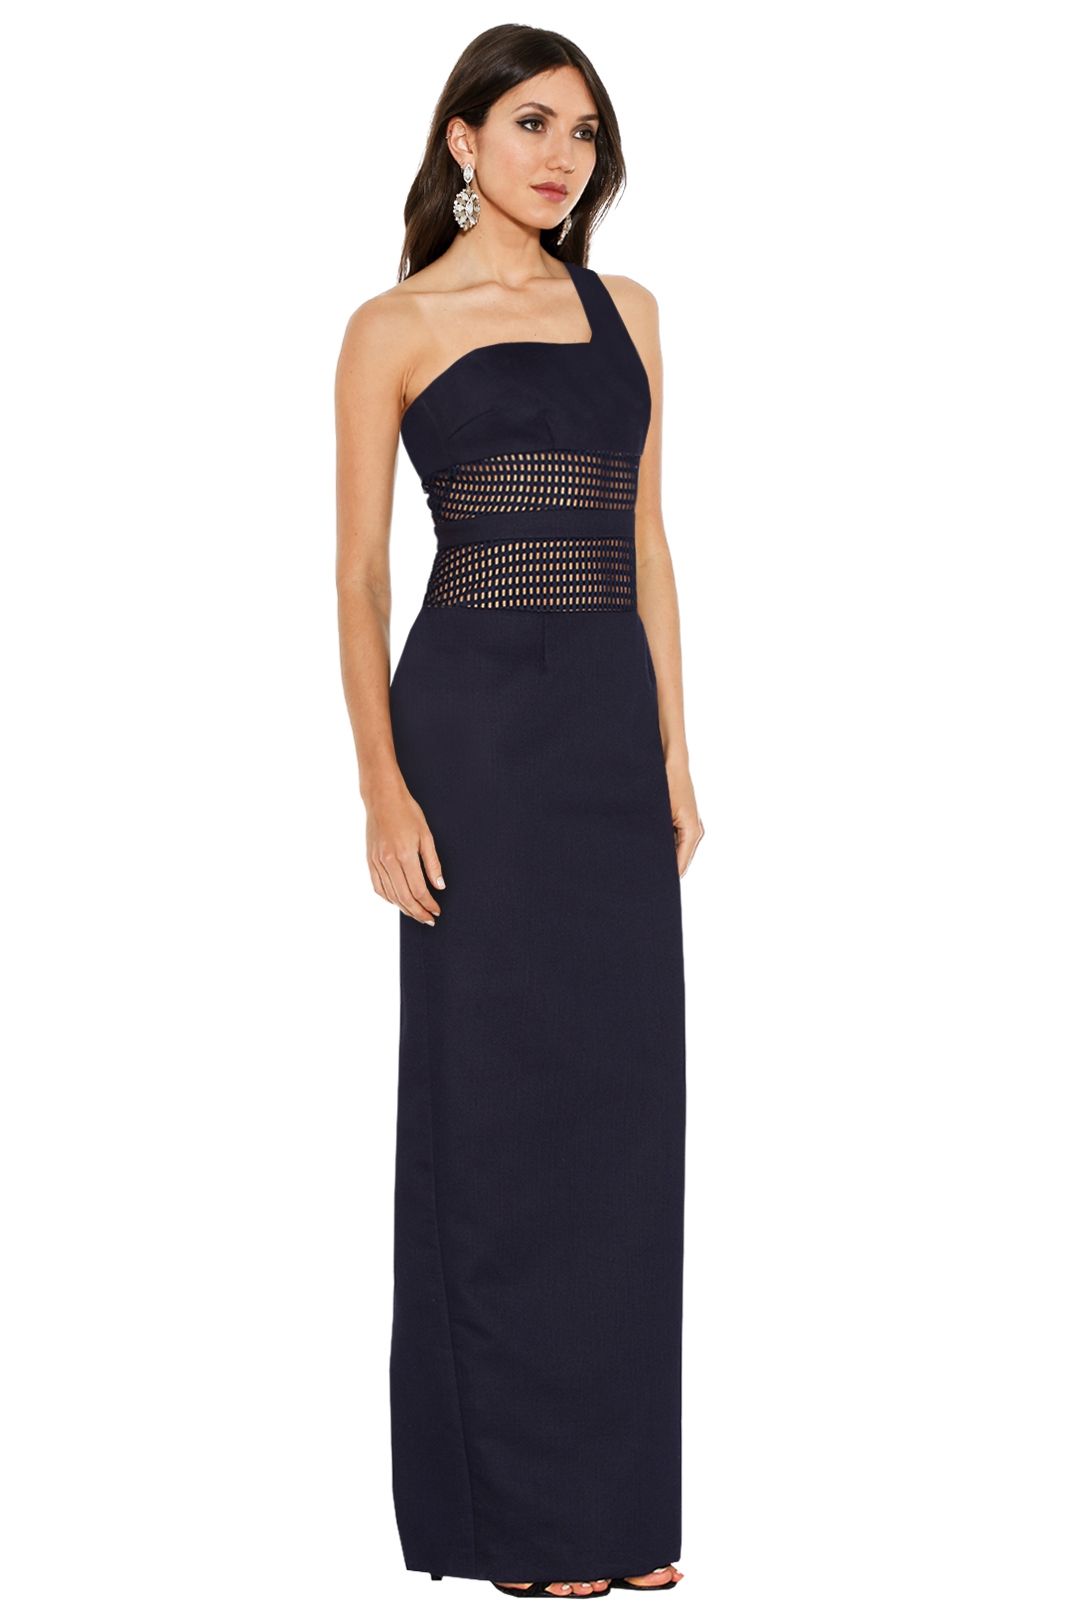 By Johnny - Mesh Panel Sharpened Gown - Navy - Side